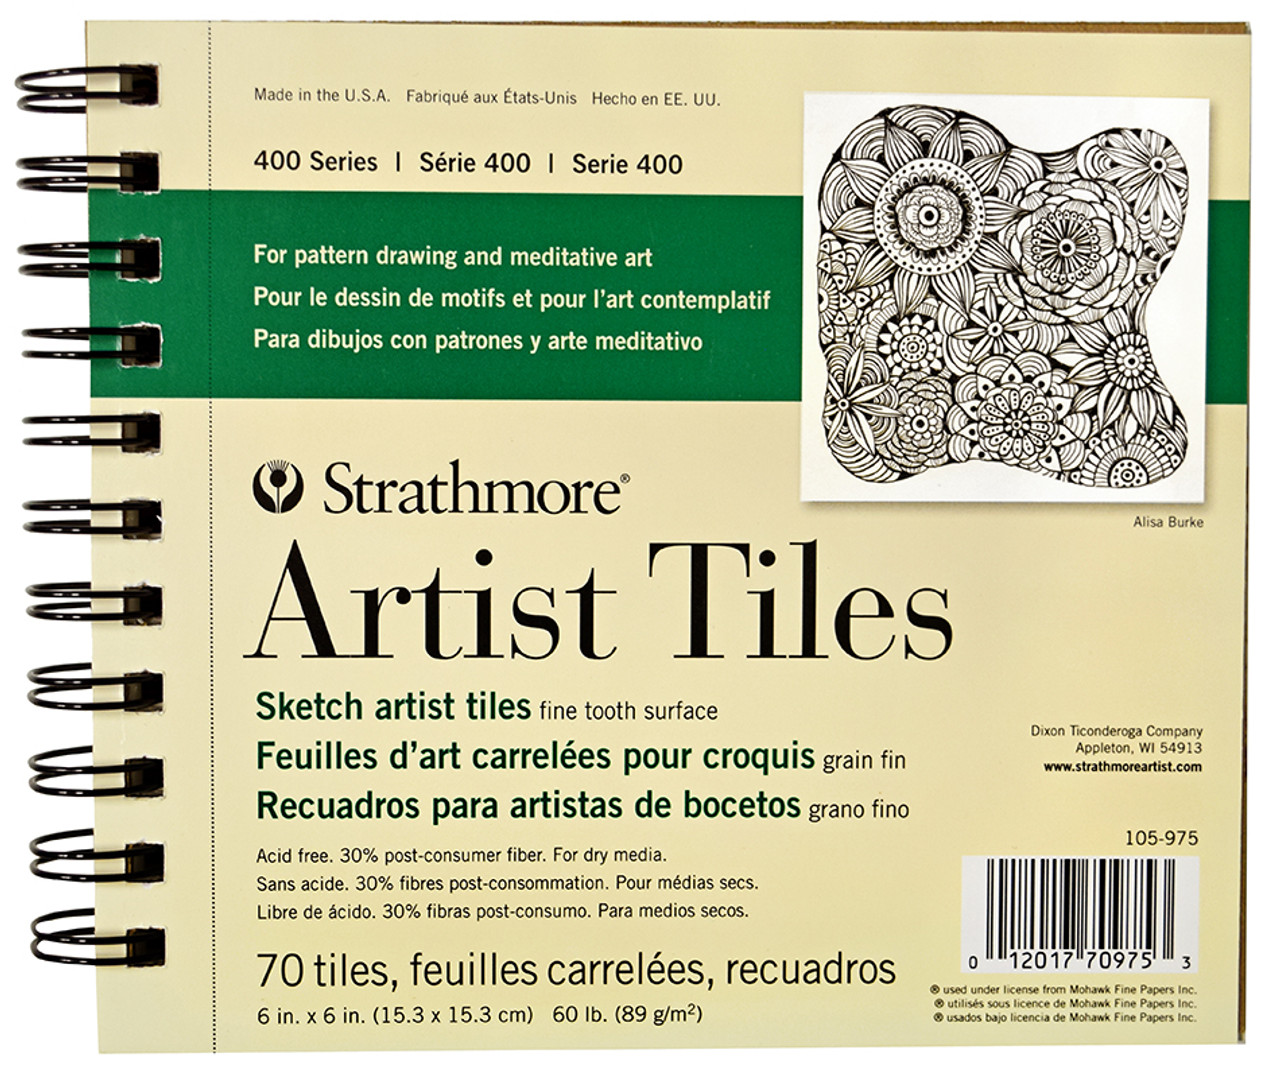 5 Tips for Using Markers - Strathmore Artist Papers